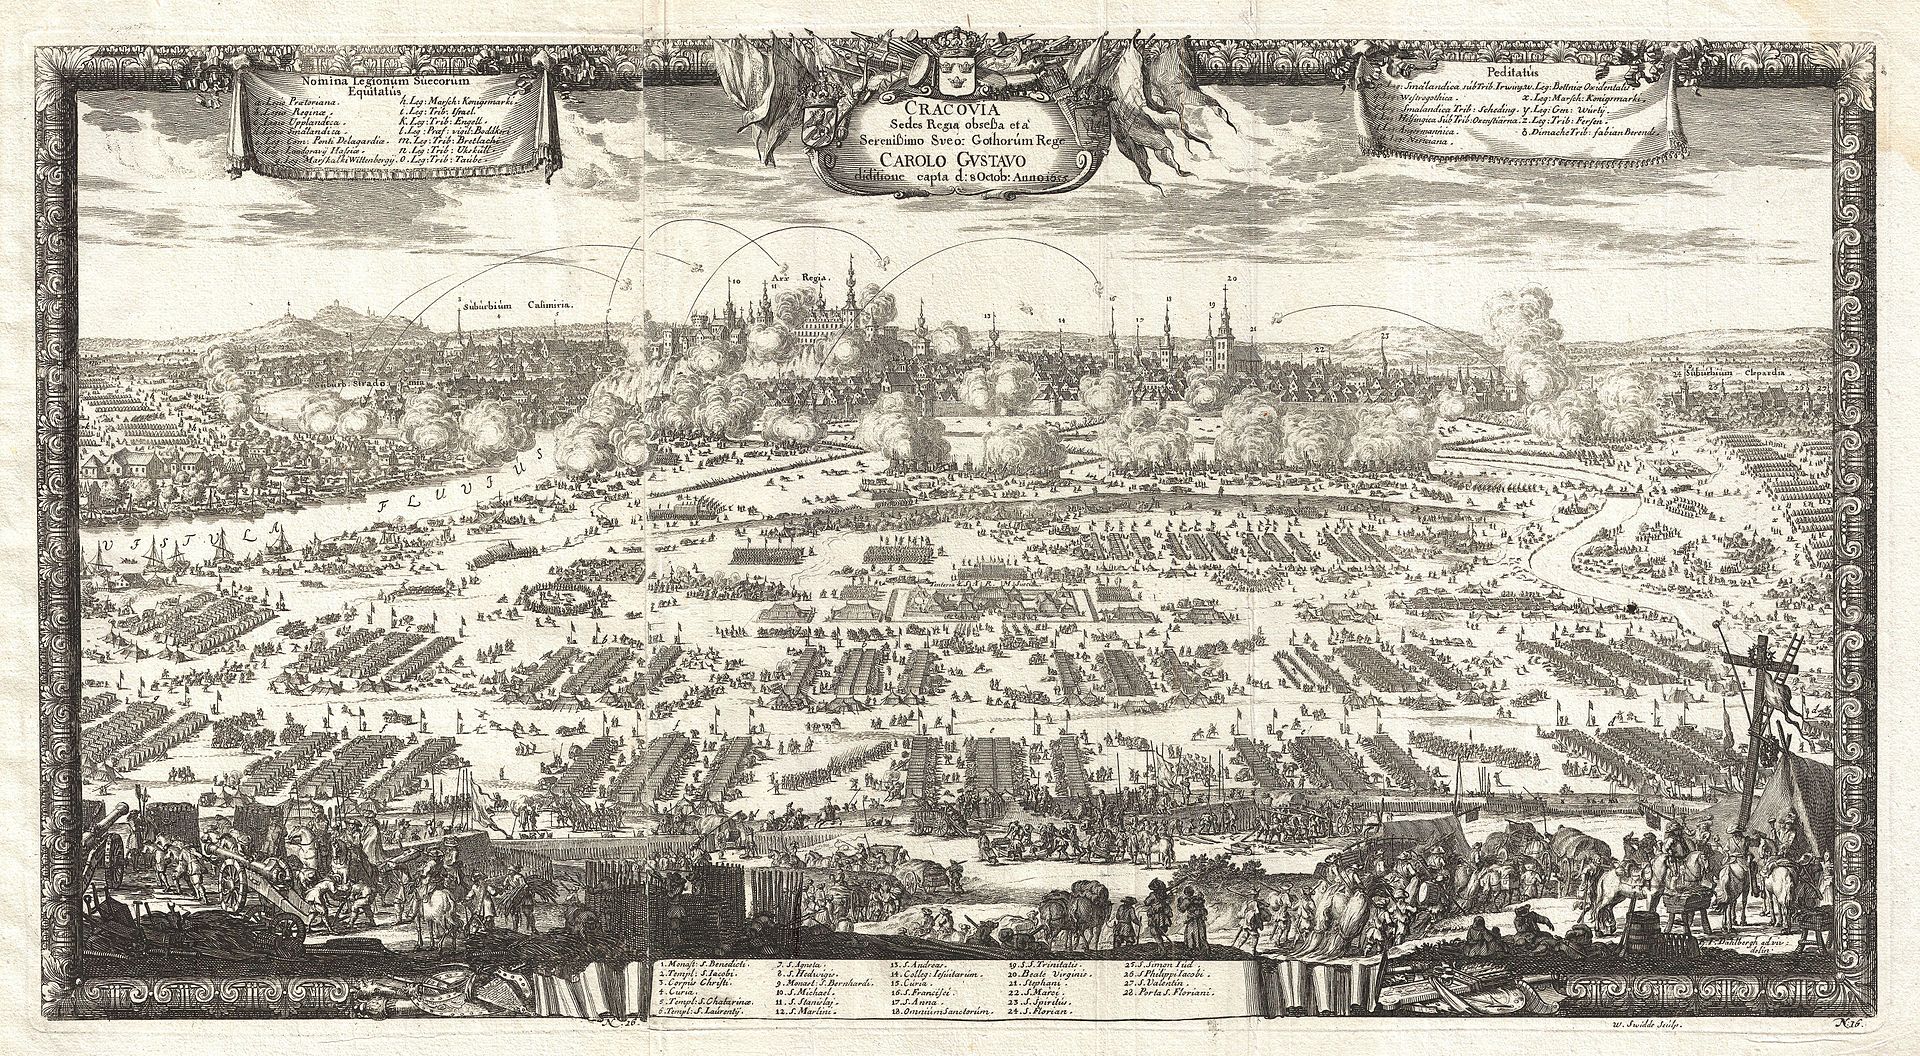 https://en.wikipedia.org/wiki/Deluge_(history)#/media/File:1697_Pufendorf_View_of_Krakow_(Cracow),_Poland_-_Geographicus_-_Krakow-pufendorf-1655.jpg